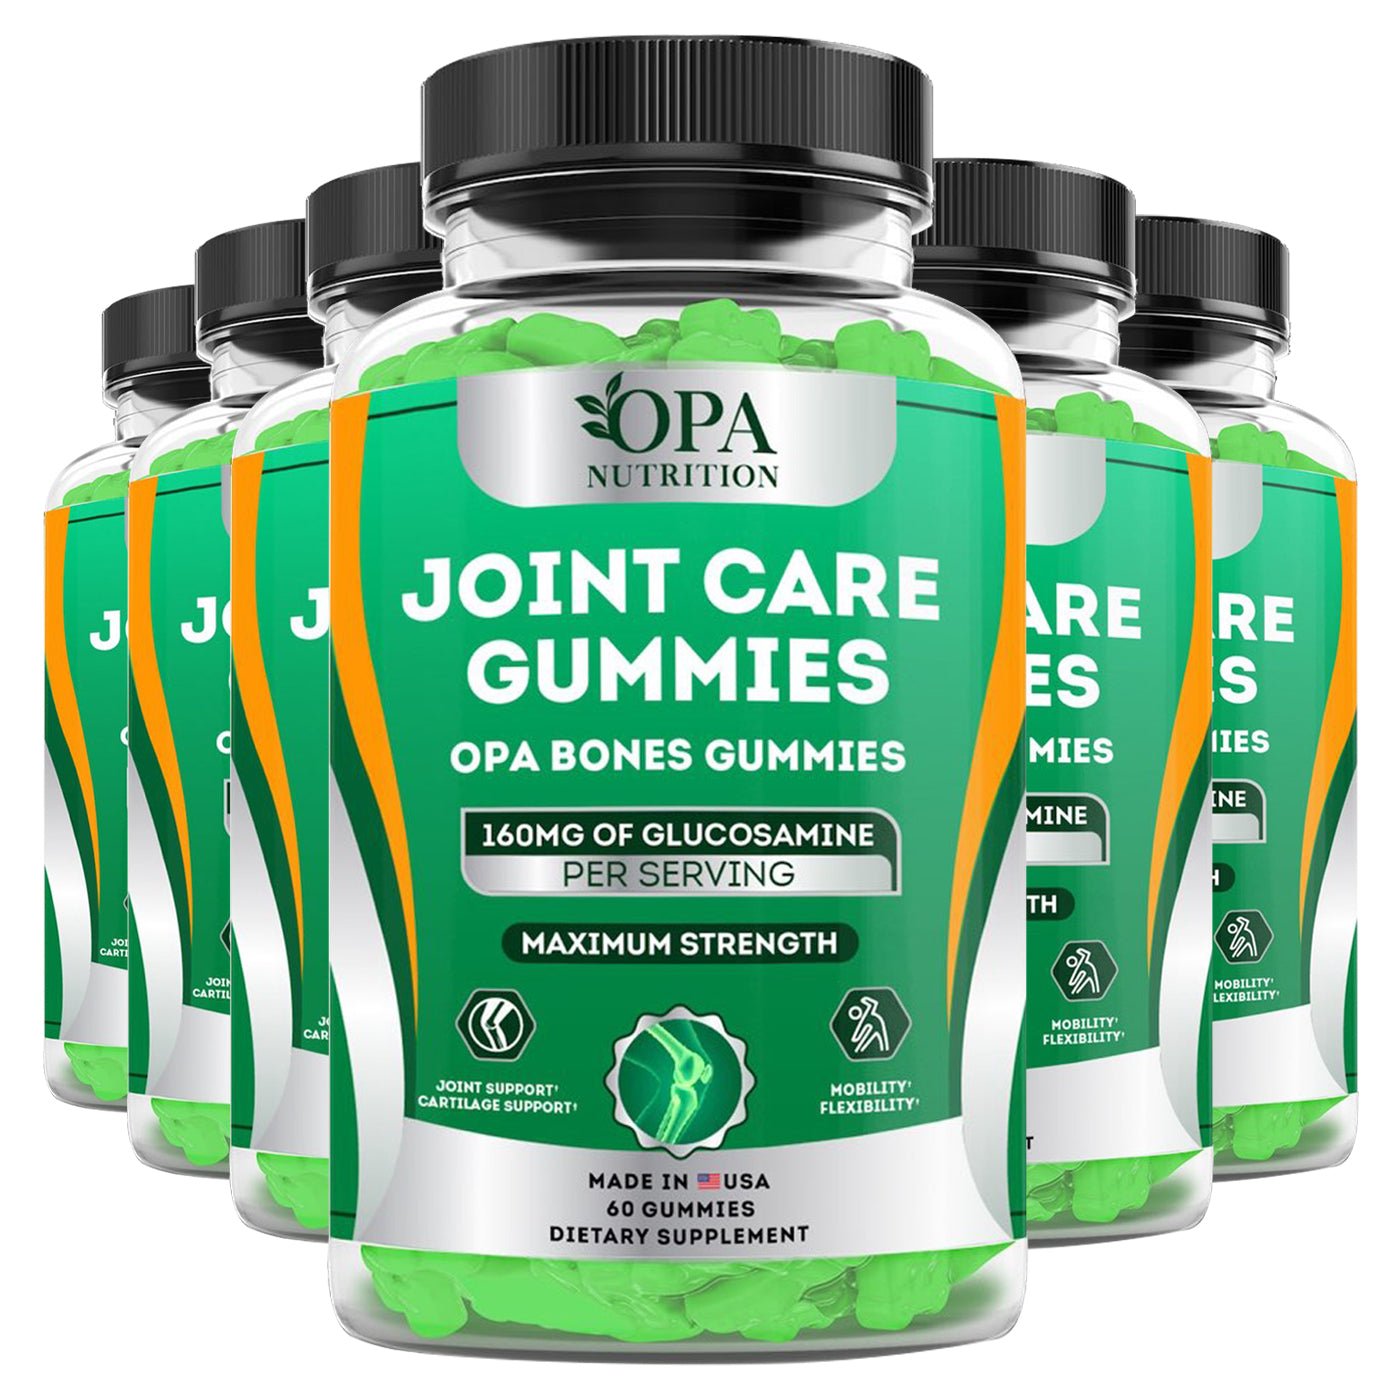 Glucosamine Gummies with Vitamin E for Joint Health - 60 Ct Pack of 6.jpg